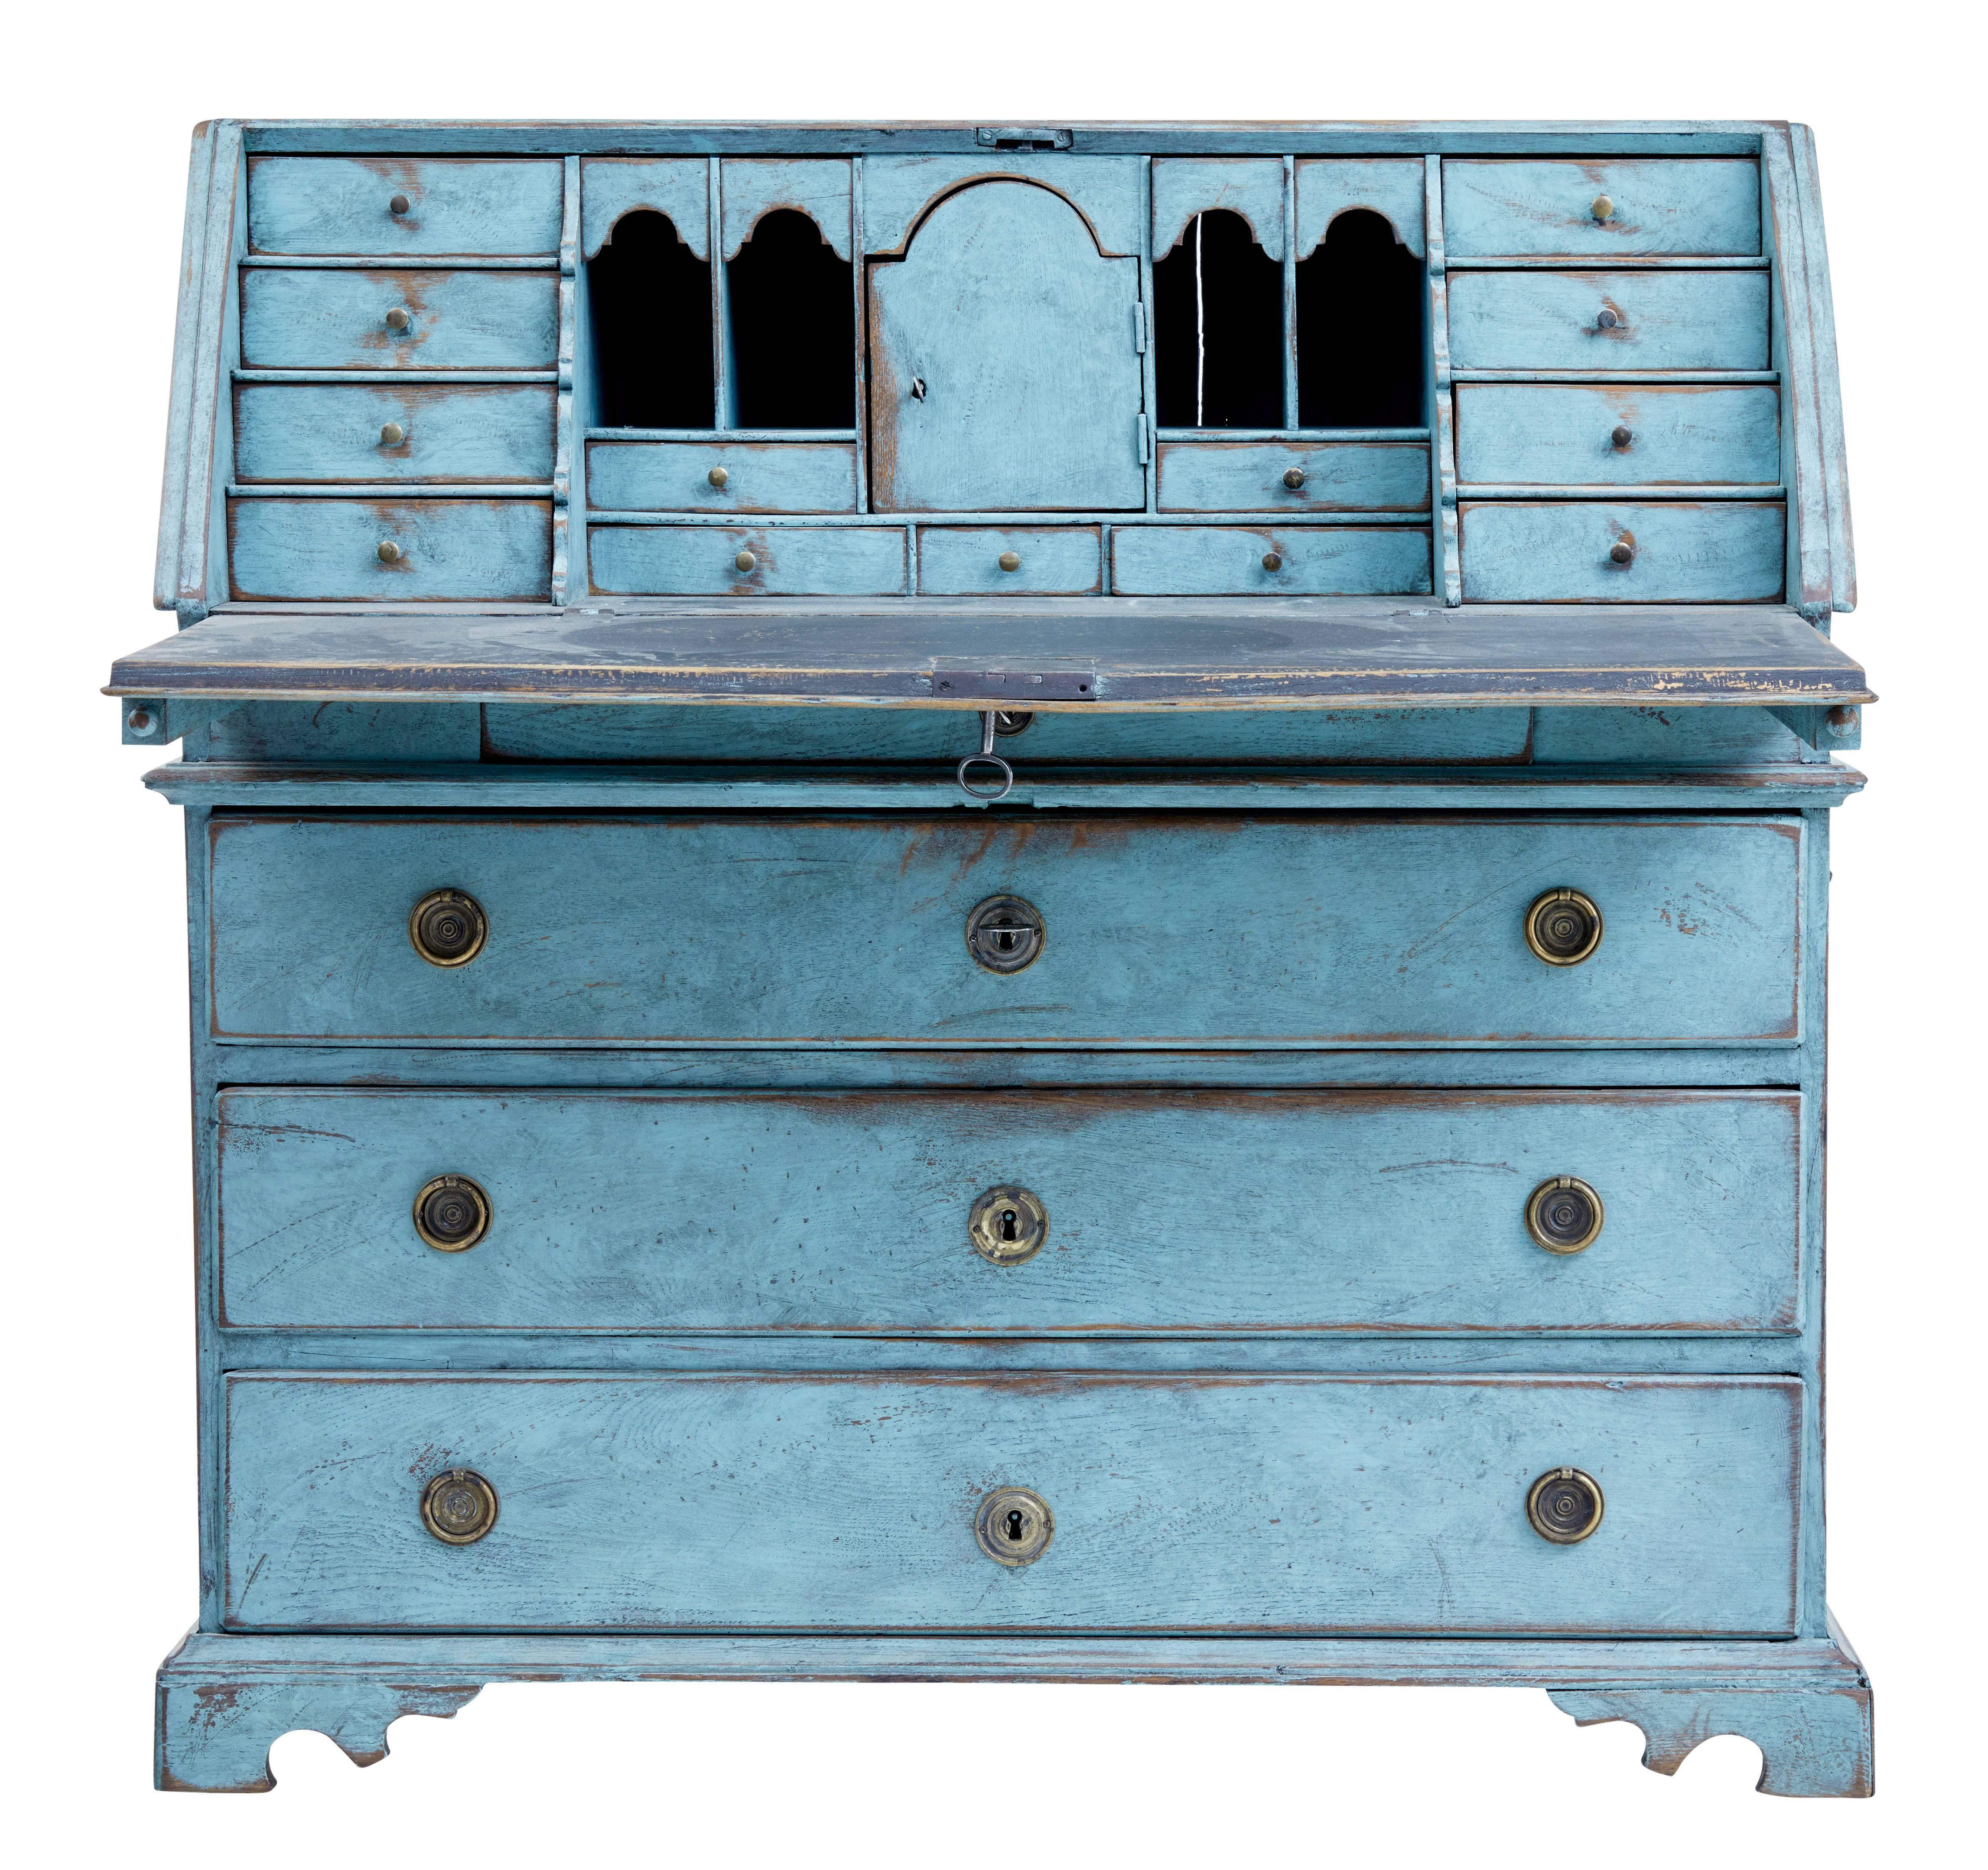 19th century painted Swedish bureau desk, circa 1860.

Single drawer above 3 large drawers with working locks and key.

Fall drops down to a writing height of 30 1/4